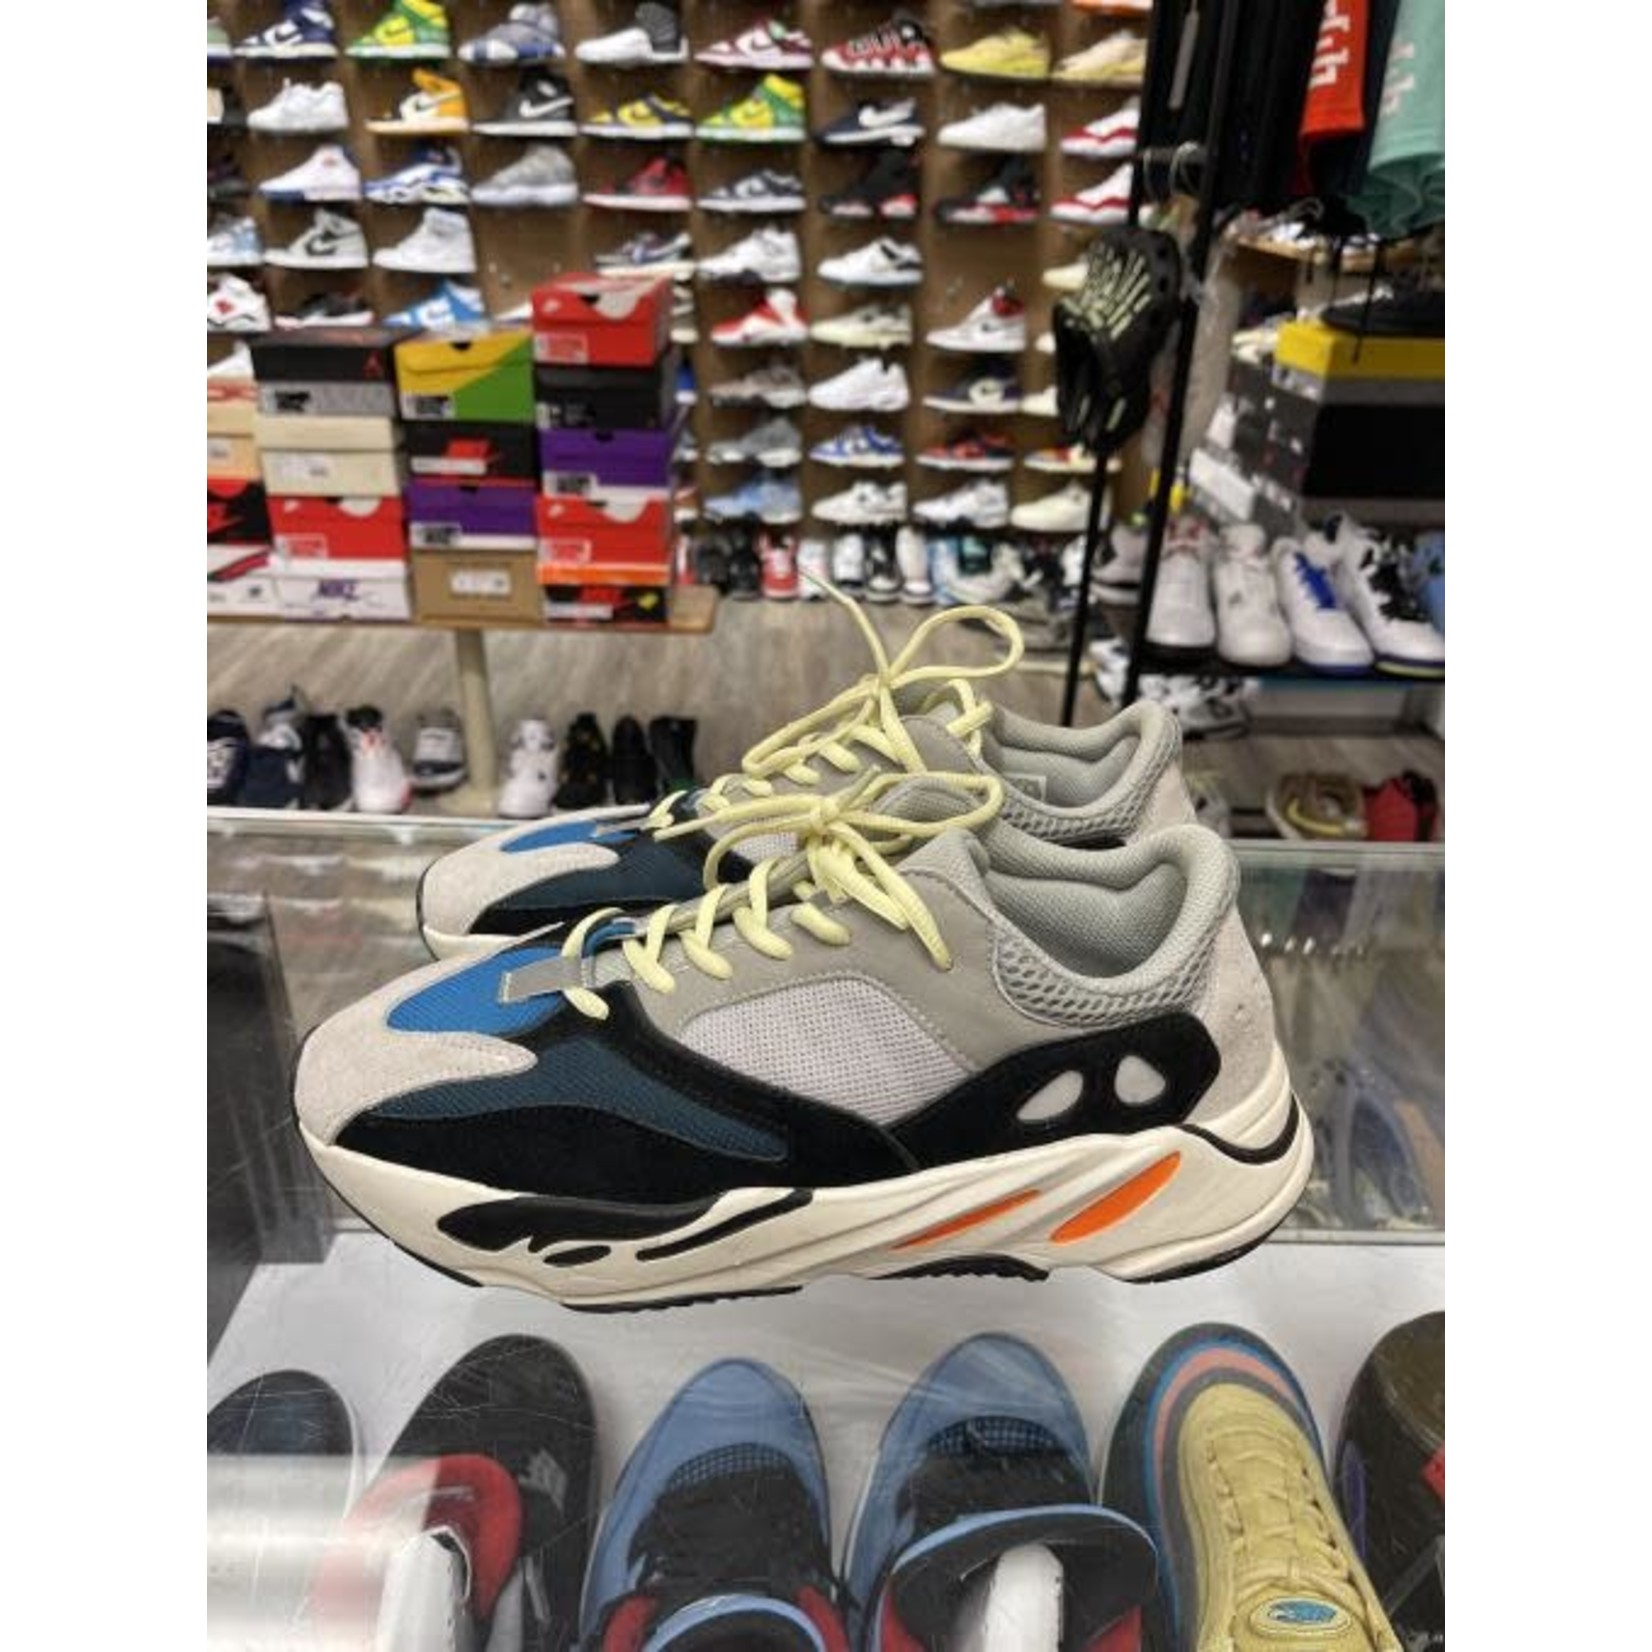 Adidas adidas Yeezy Boost 700 Wave Runner Size 11.5, PREOWNED NO BOX